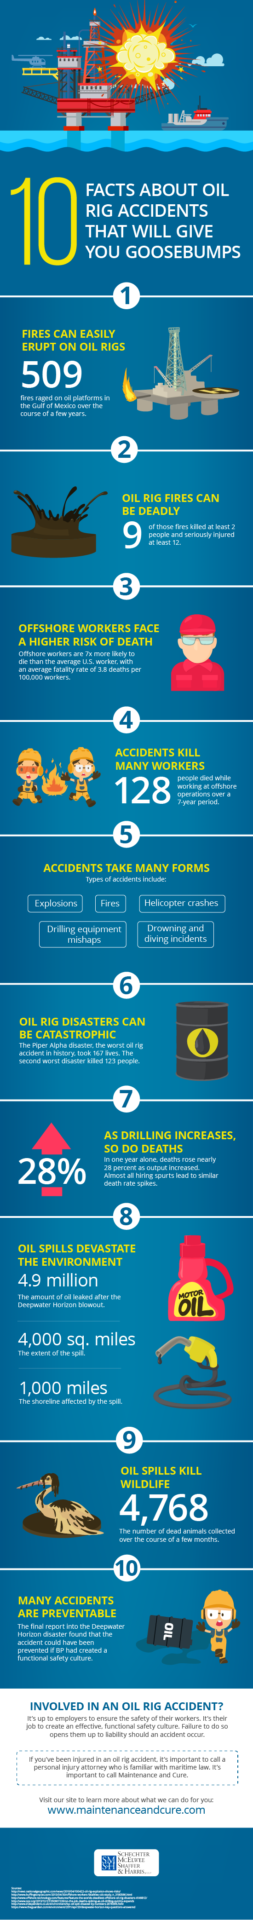 10 Facts About Oil Rig Accidents Infographic